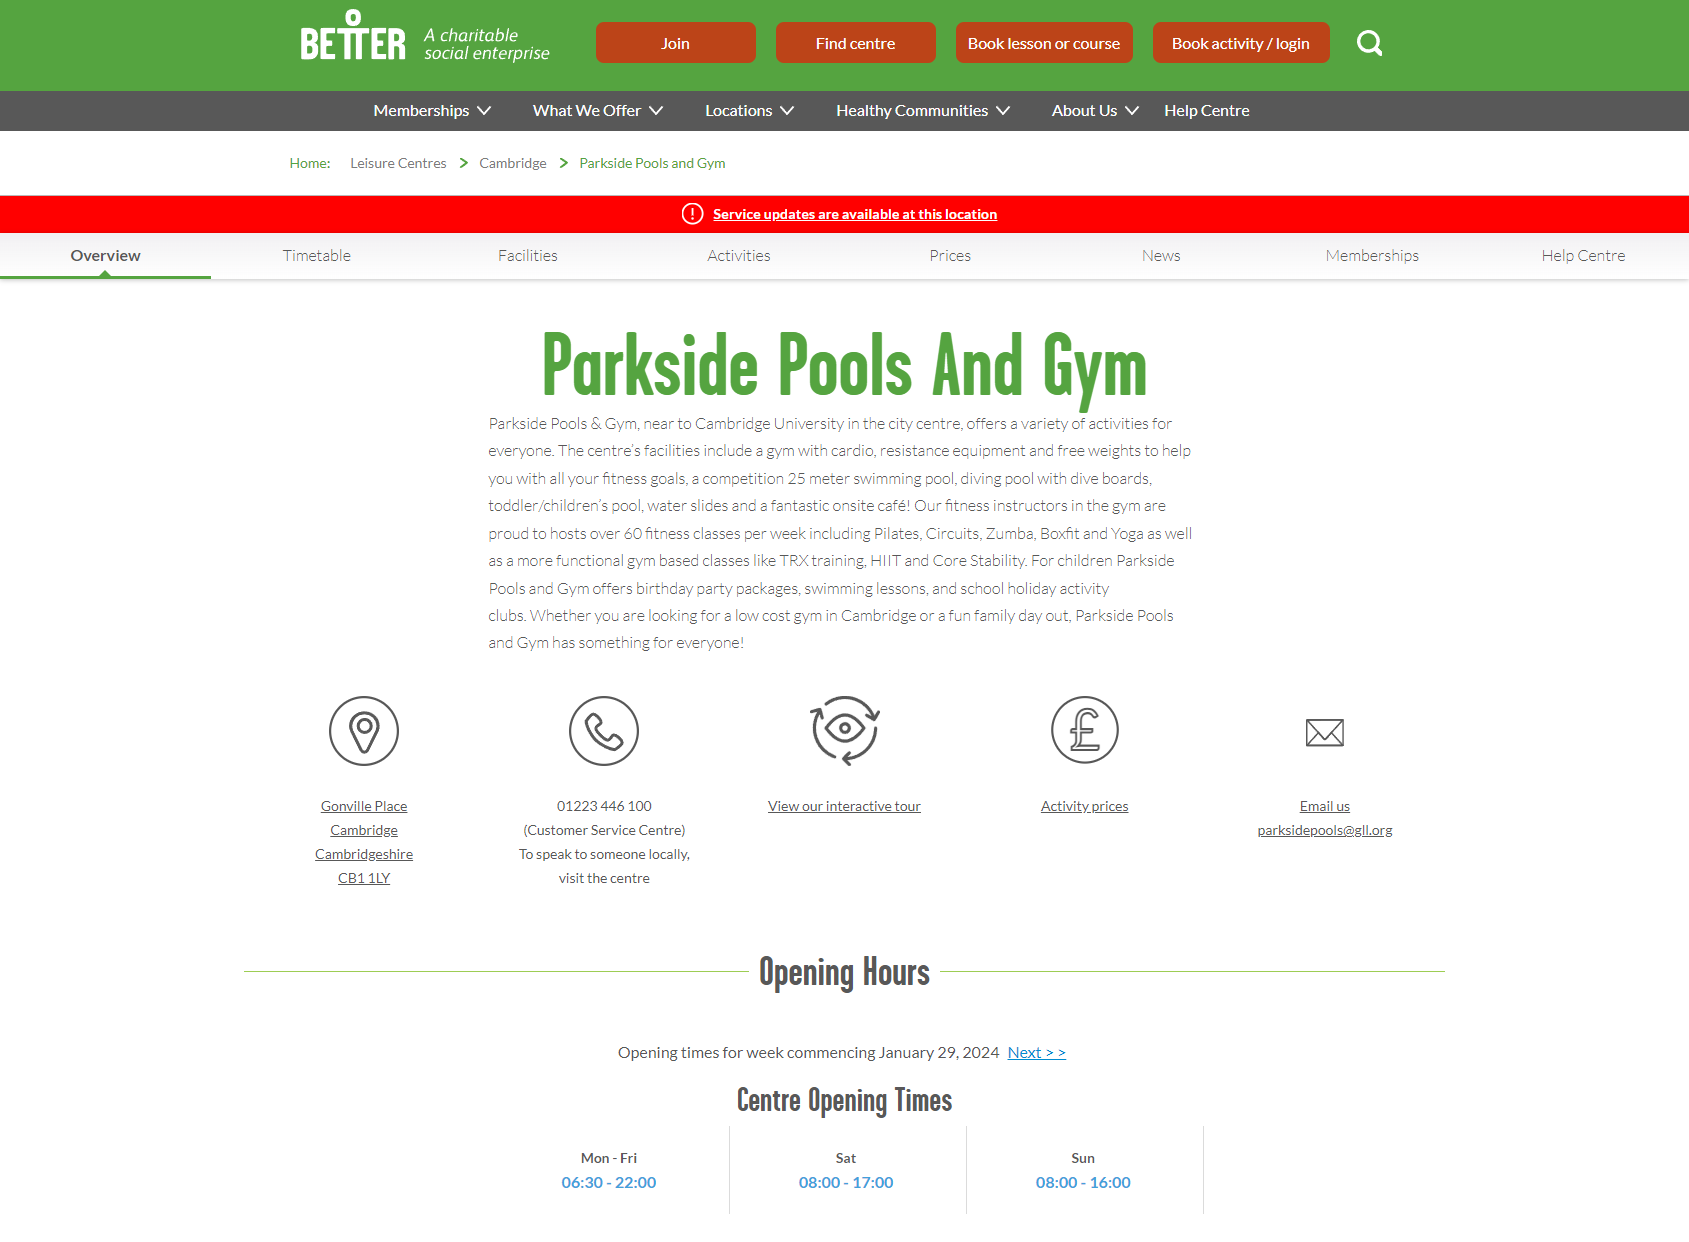 Parkside Pools and Gym